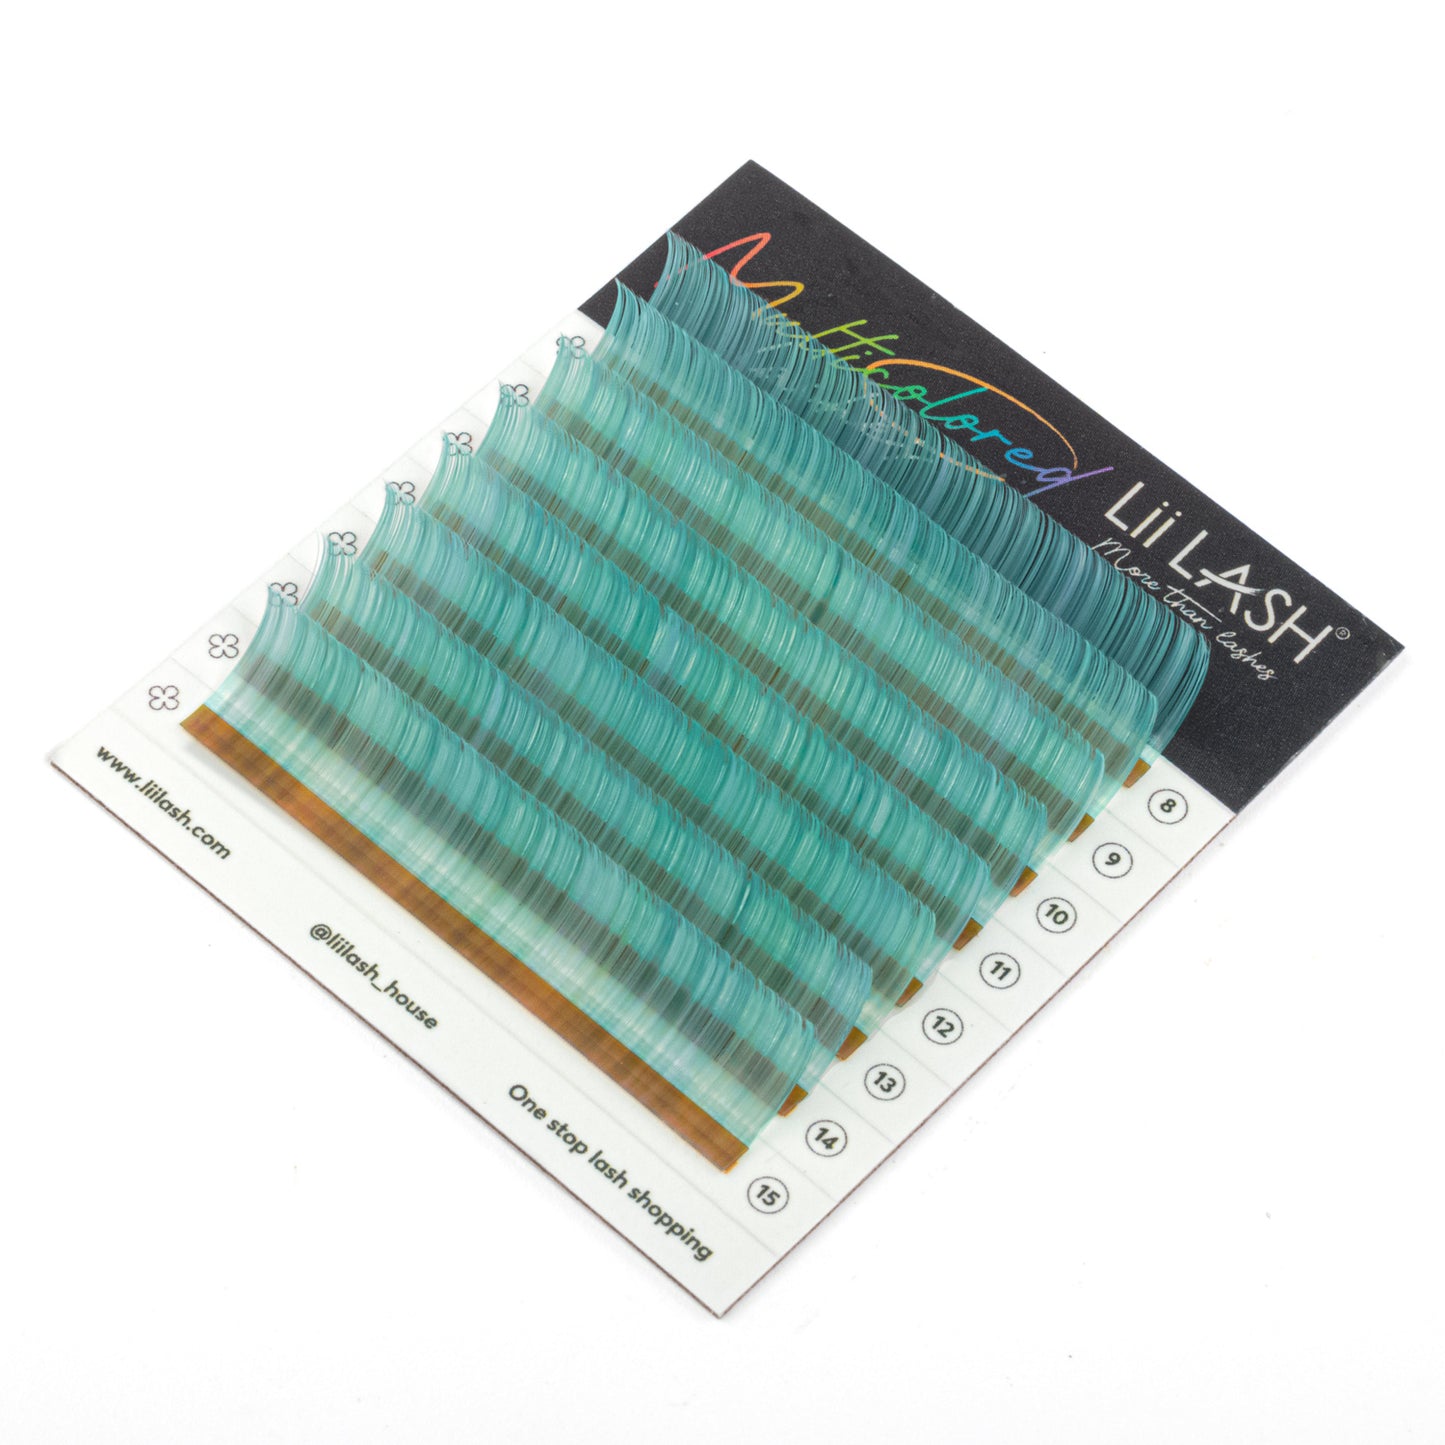 Multicolored - Bright Turquoise Lashes - 0.07mm